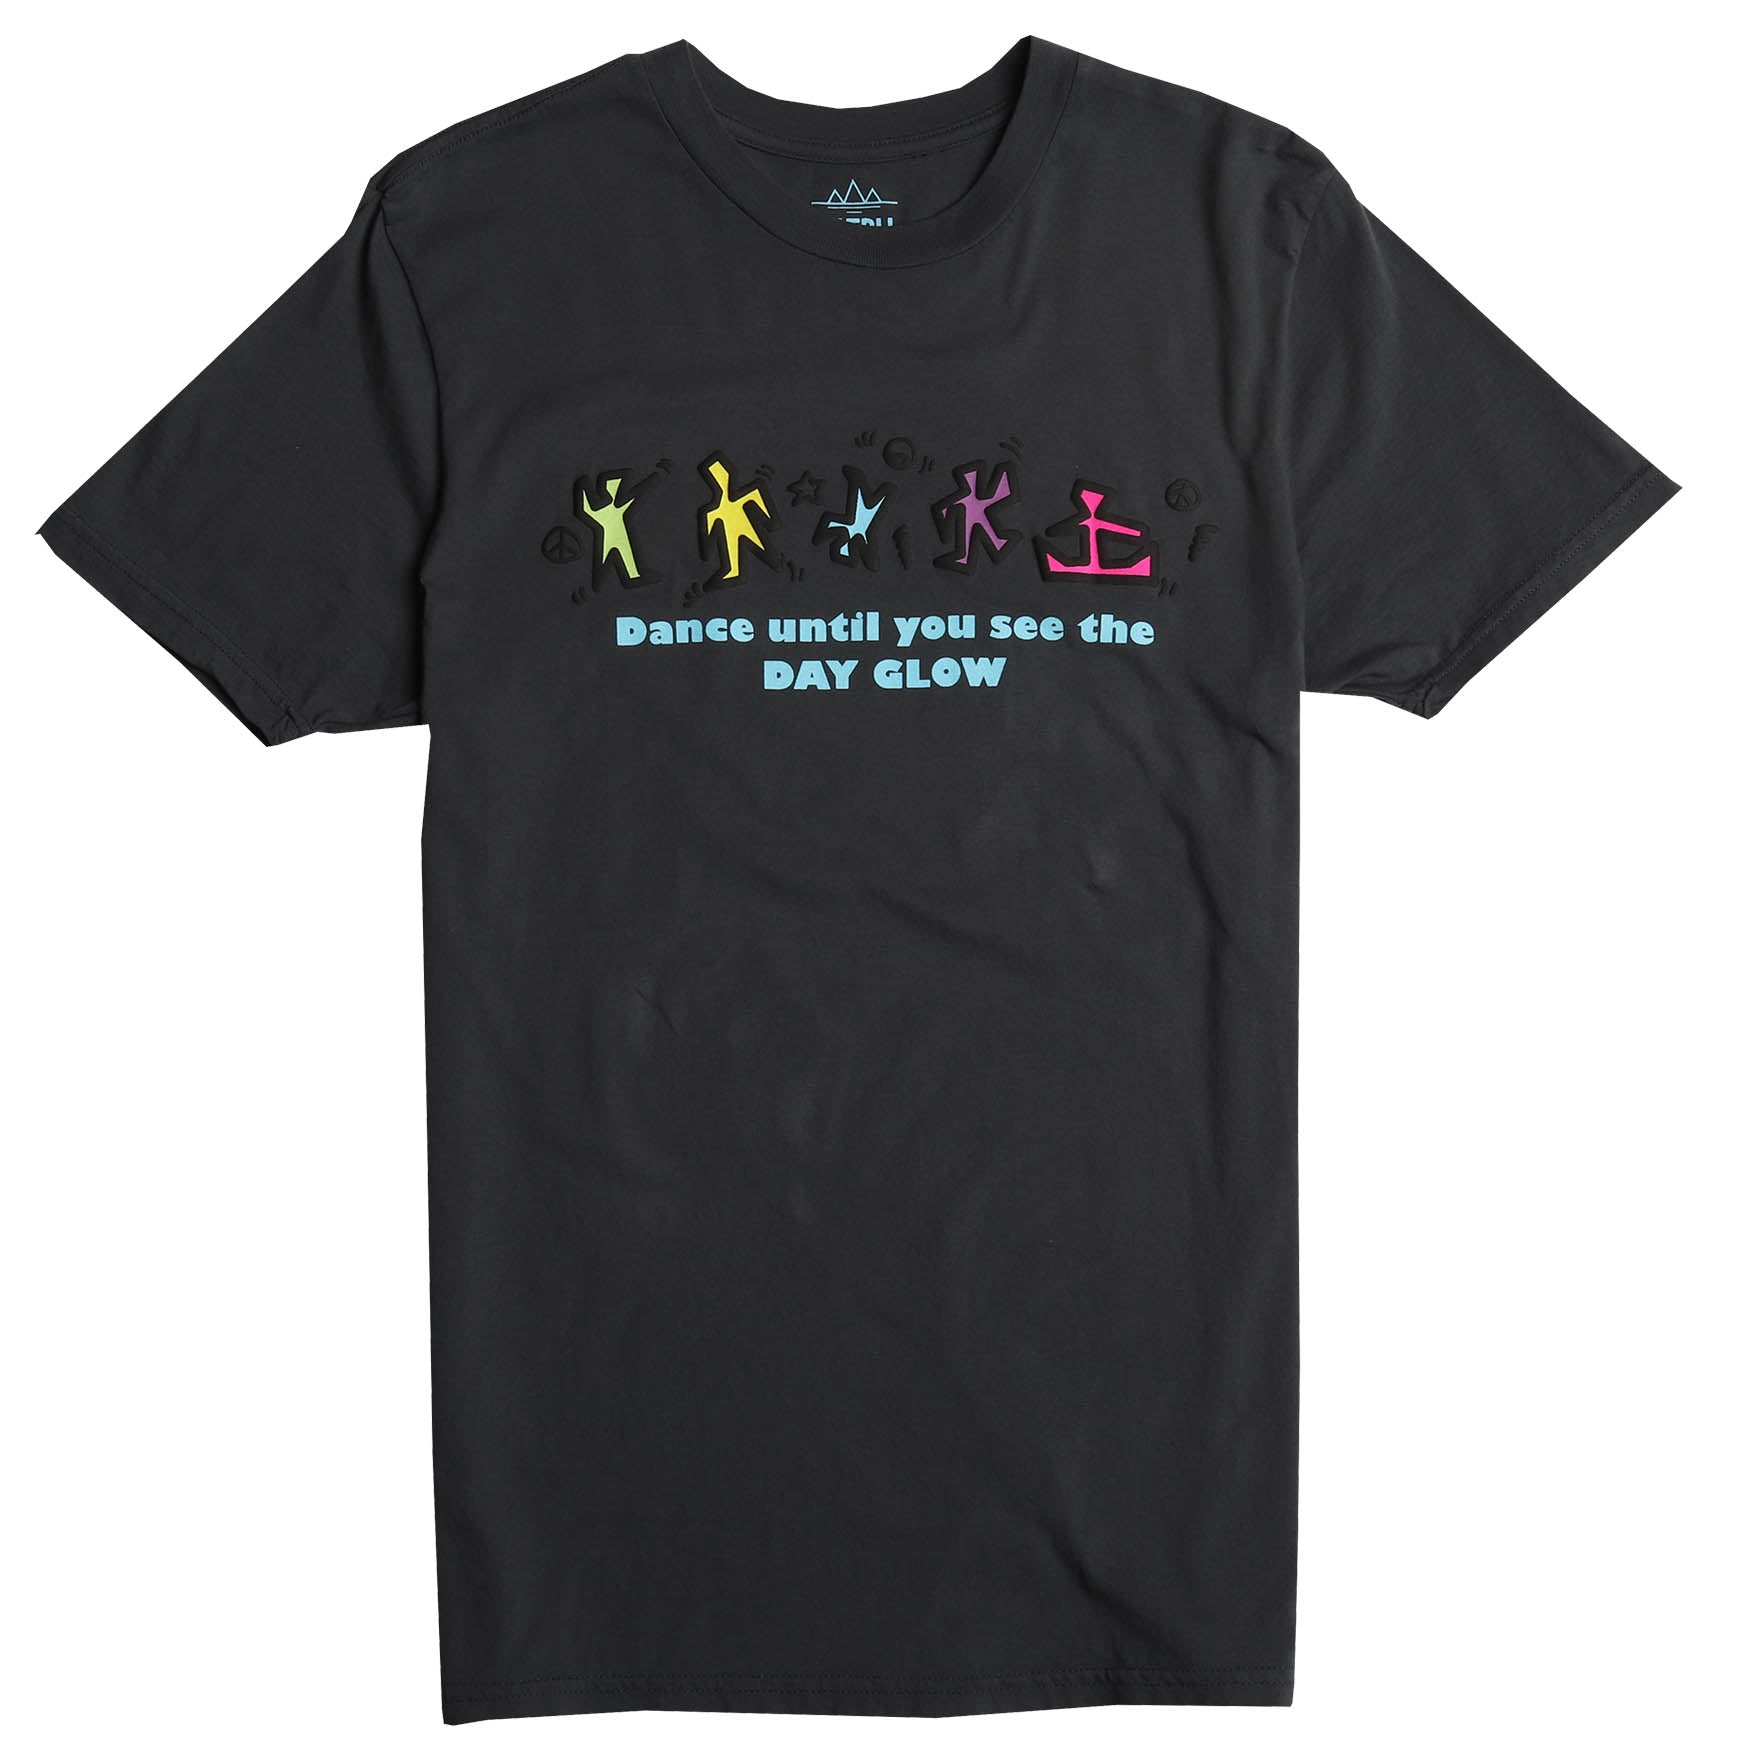 DANCE UNTIL YOU SEE THE DAY GLOW puffy ink graphic tee